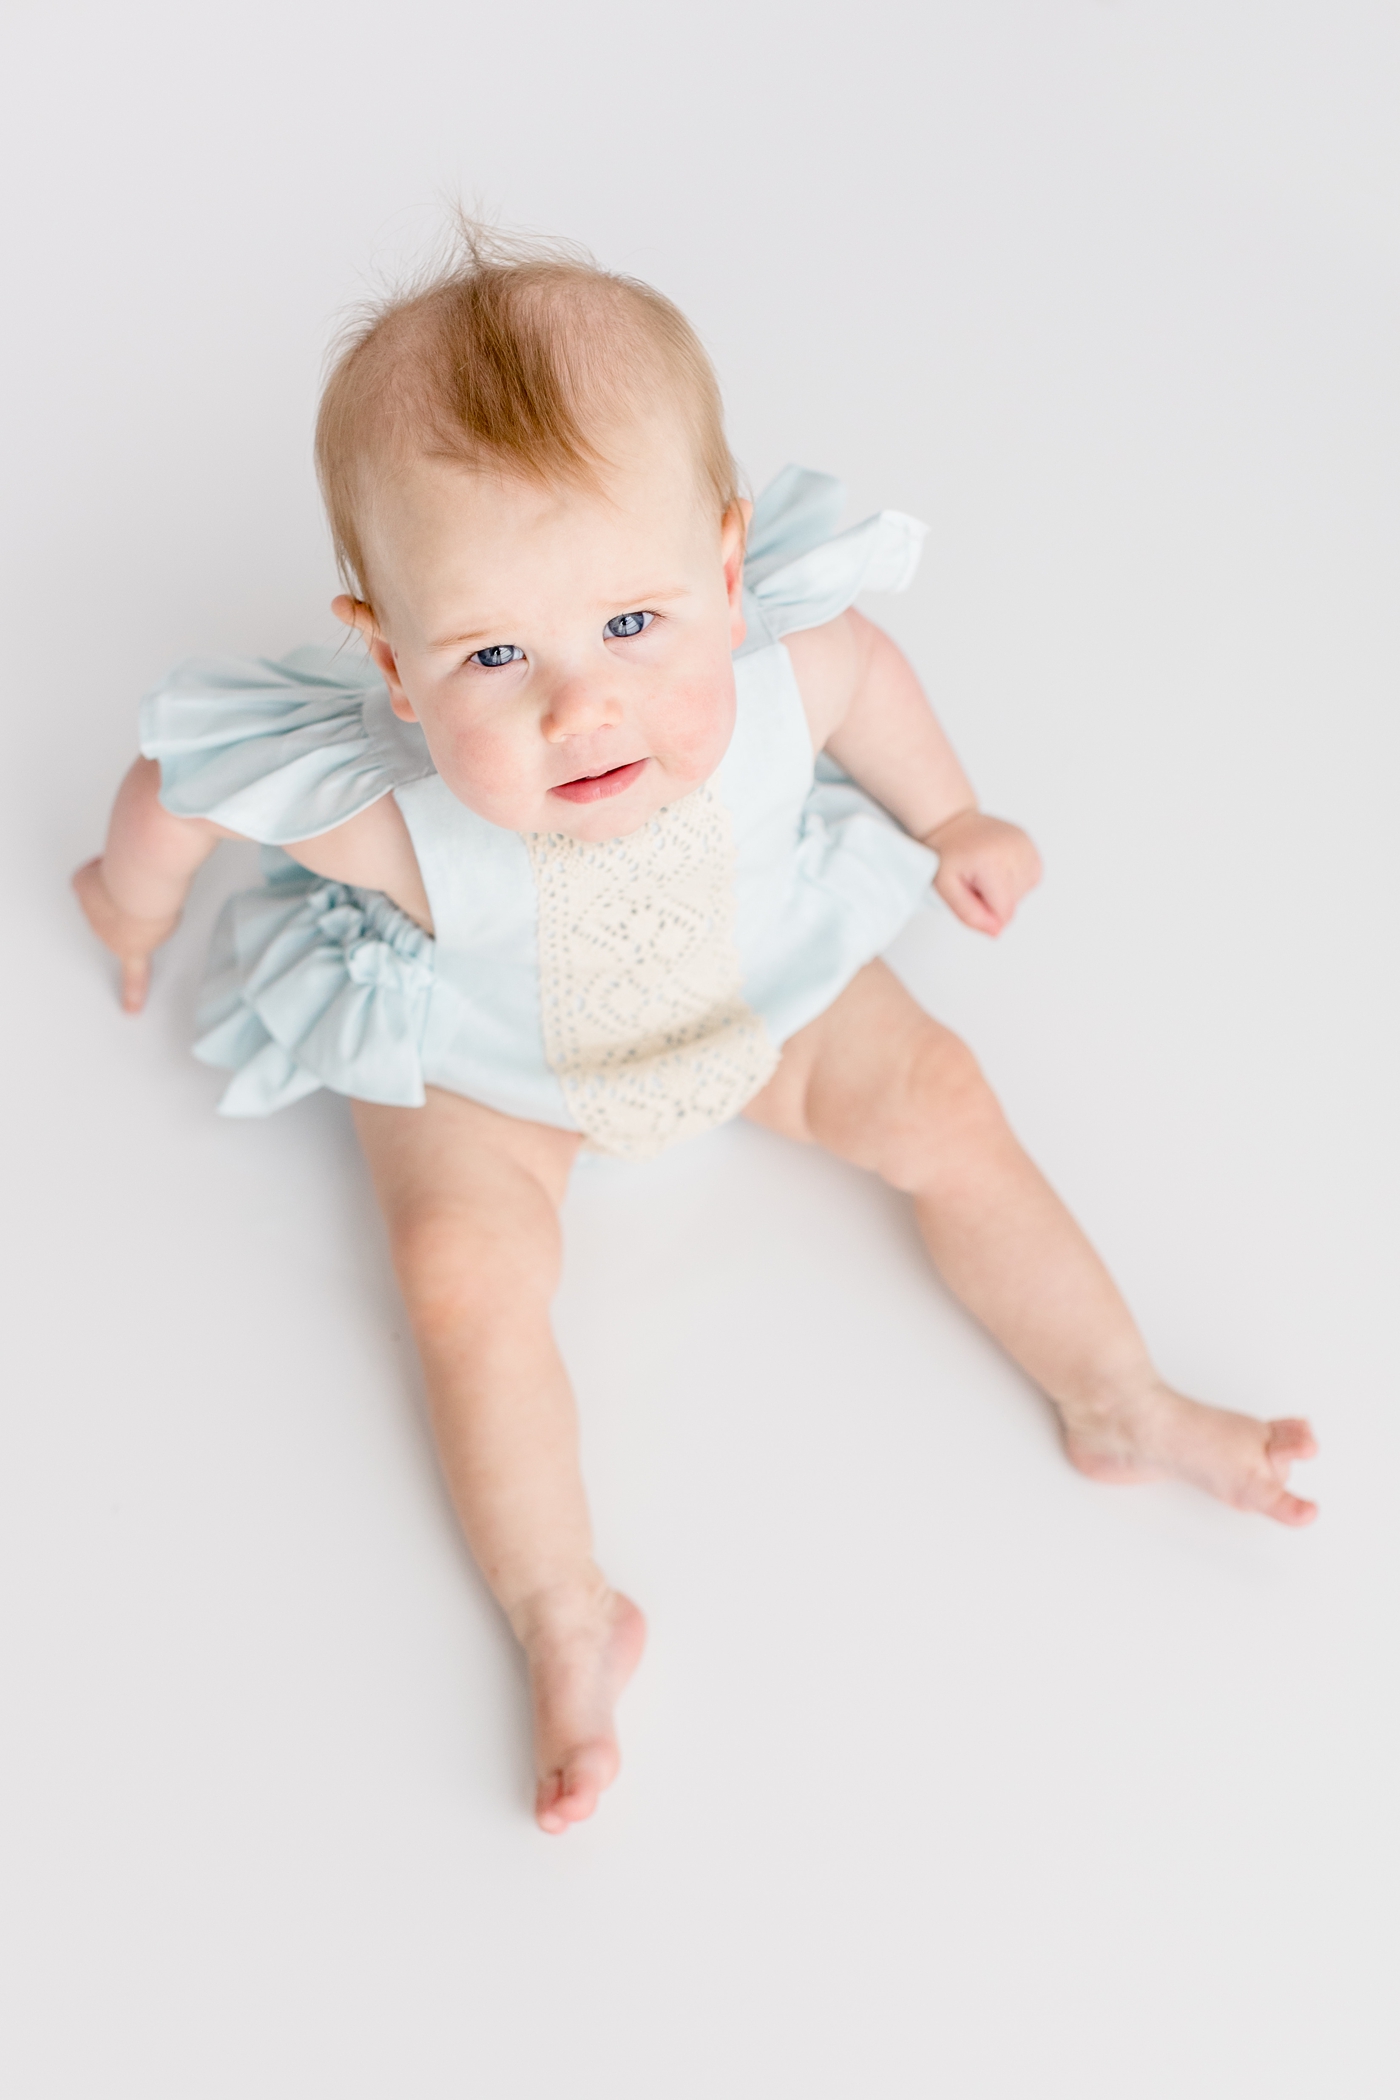 Blue eyed baby girl looking up at camera during photo session. Image by Sana Ahmed Photography.